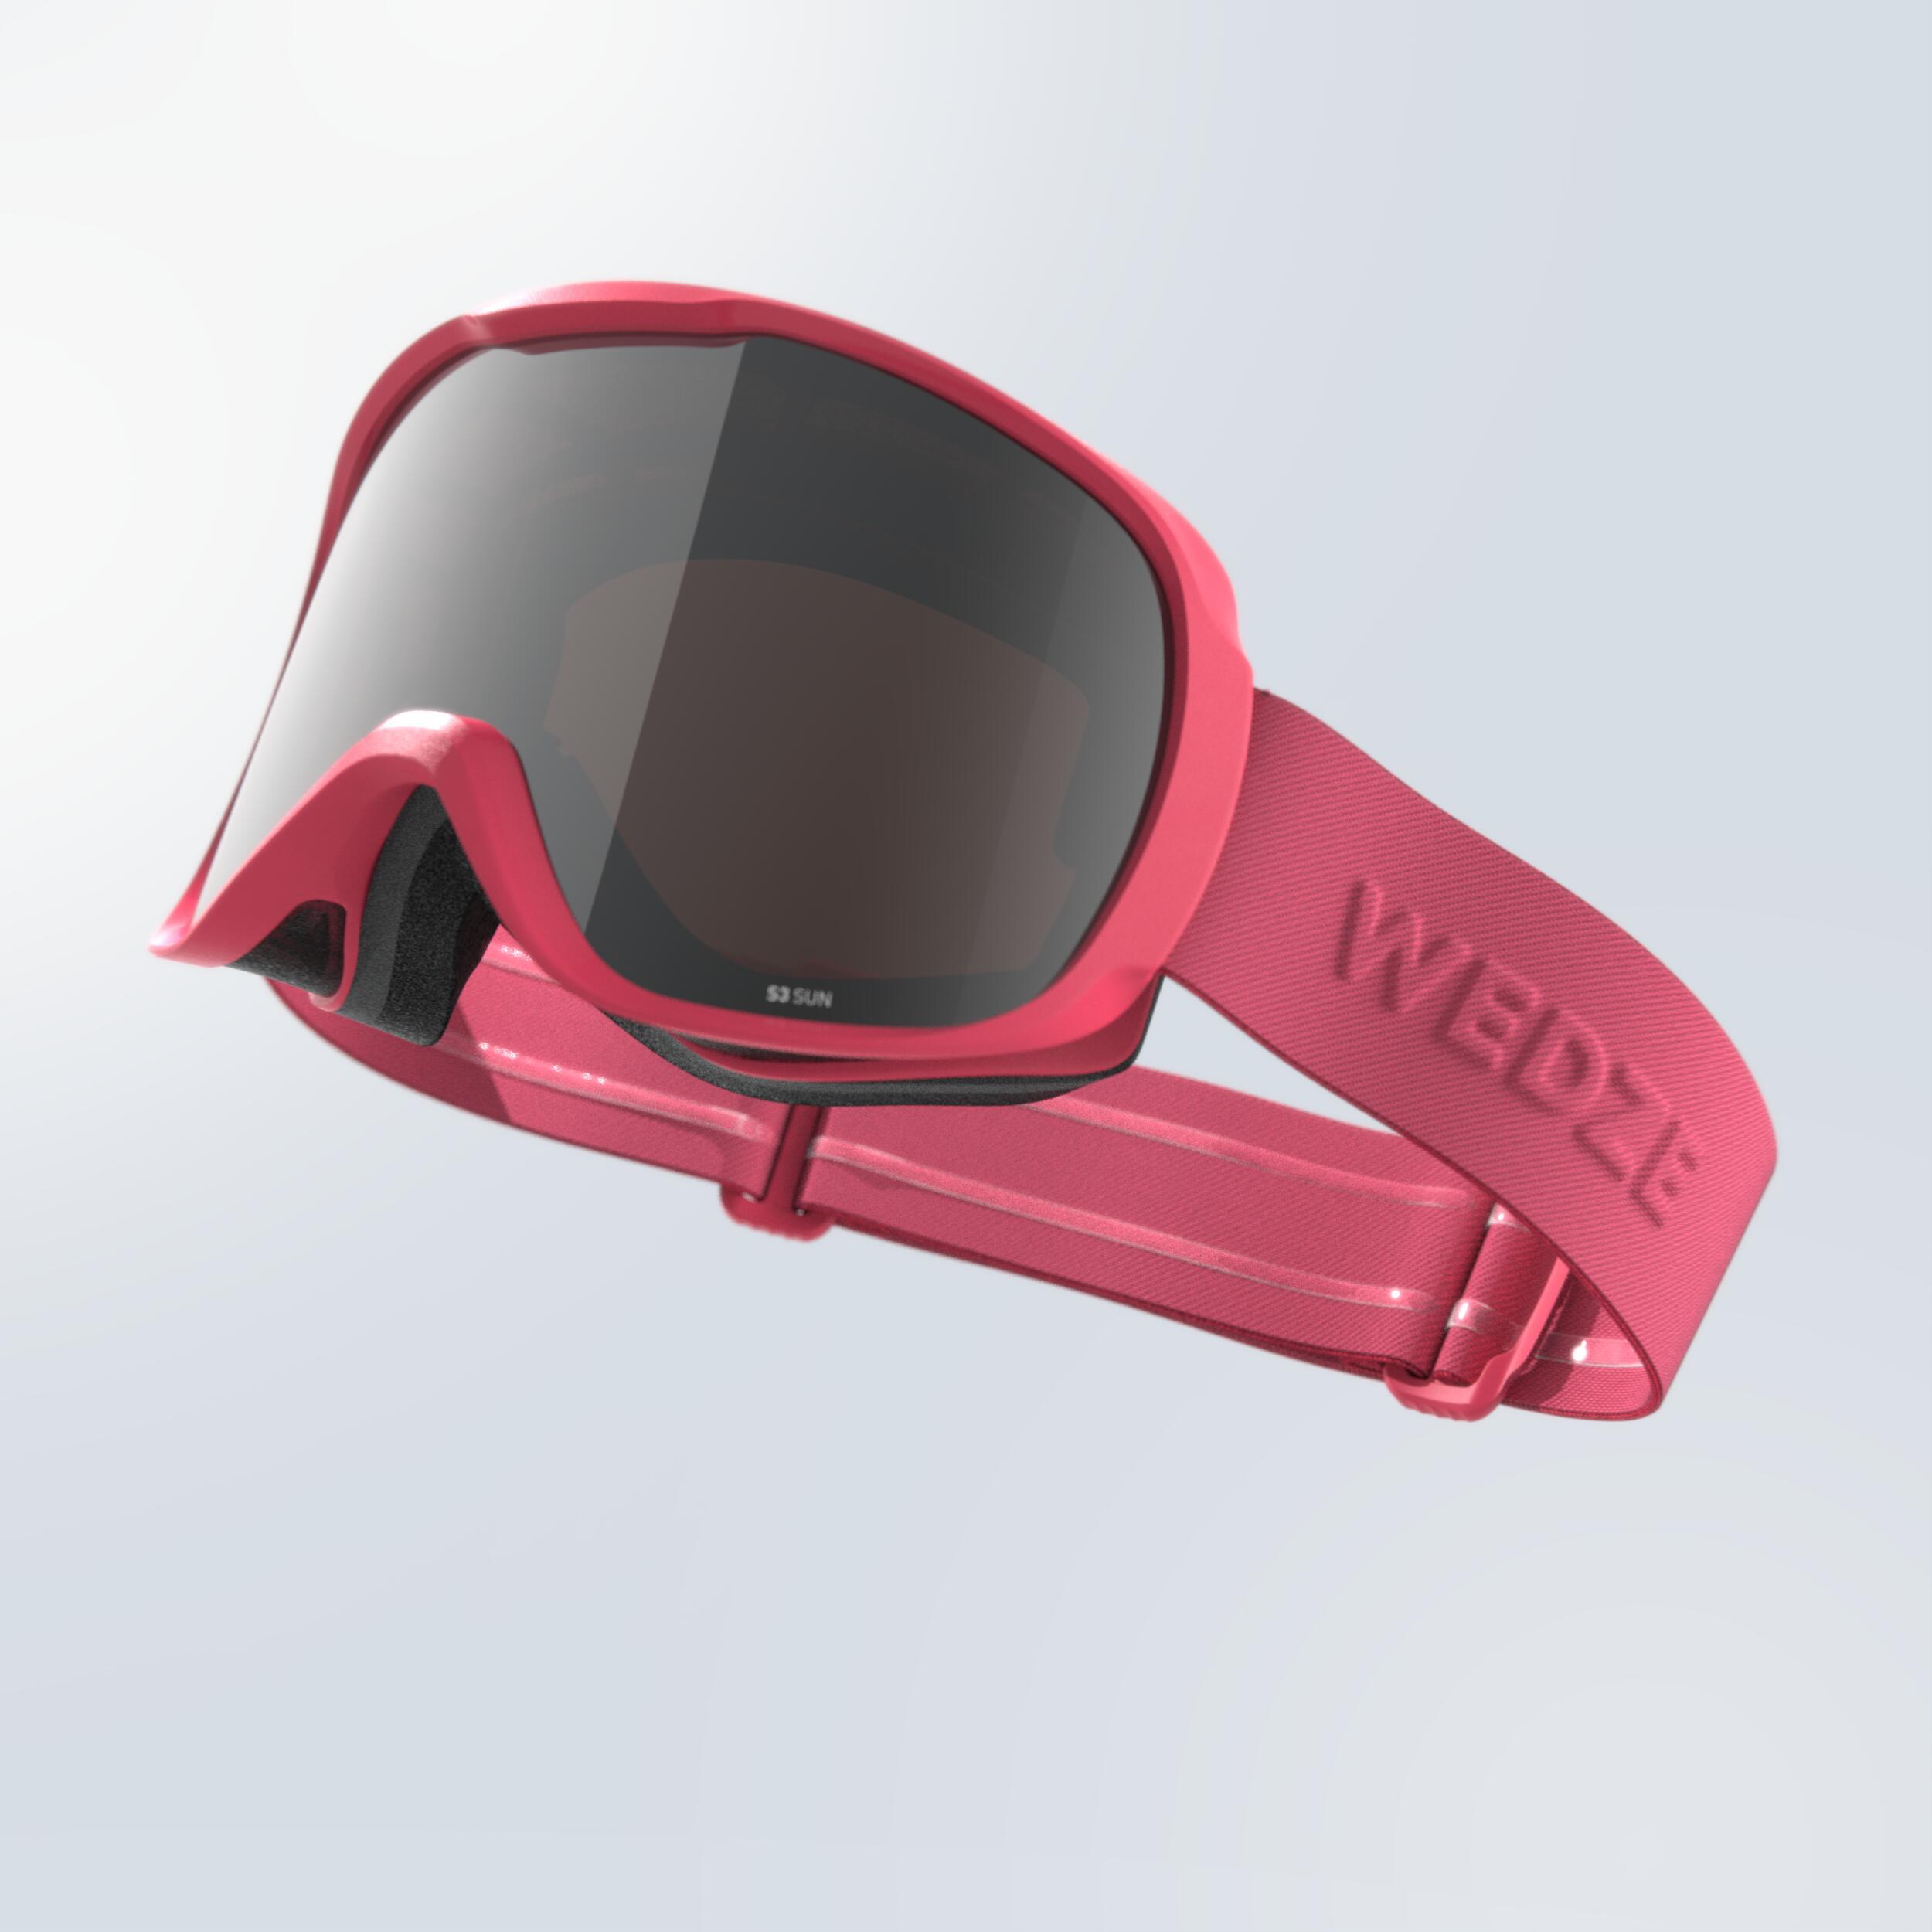 KIDS AND ADULT SKIING AND SNOWBOARDING GOOD WEATHER GOGGLES G 500 S3 NEON PINK 2/5